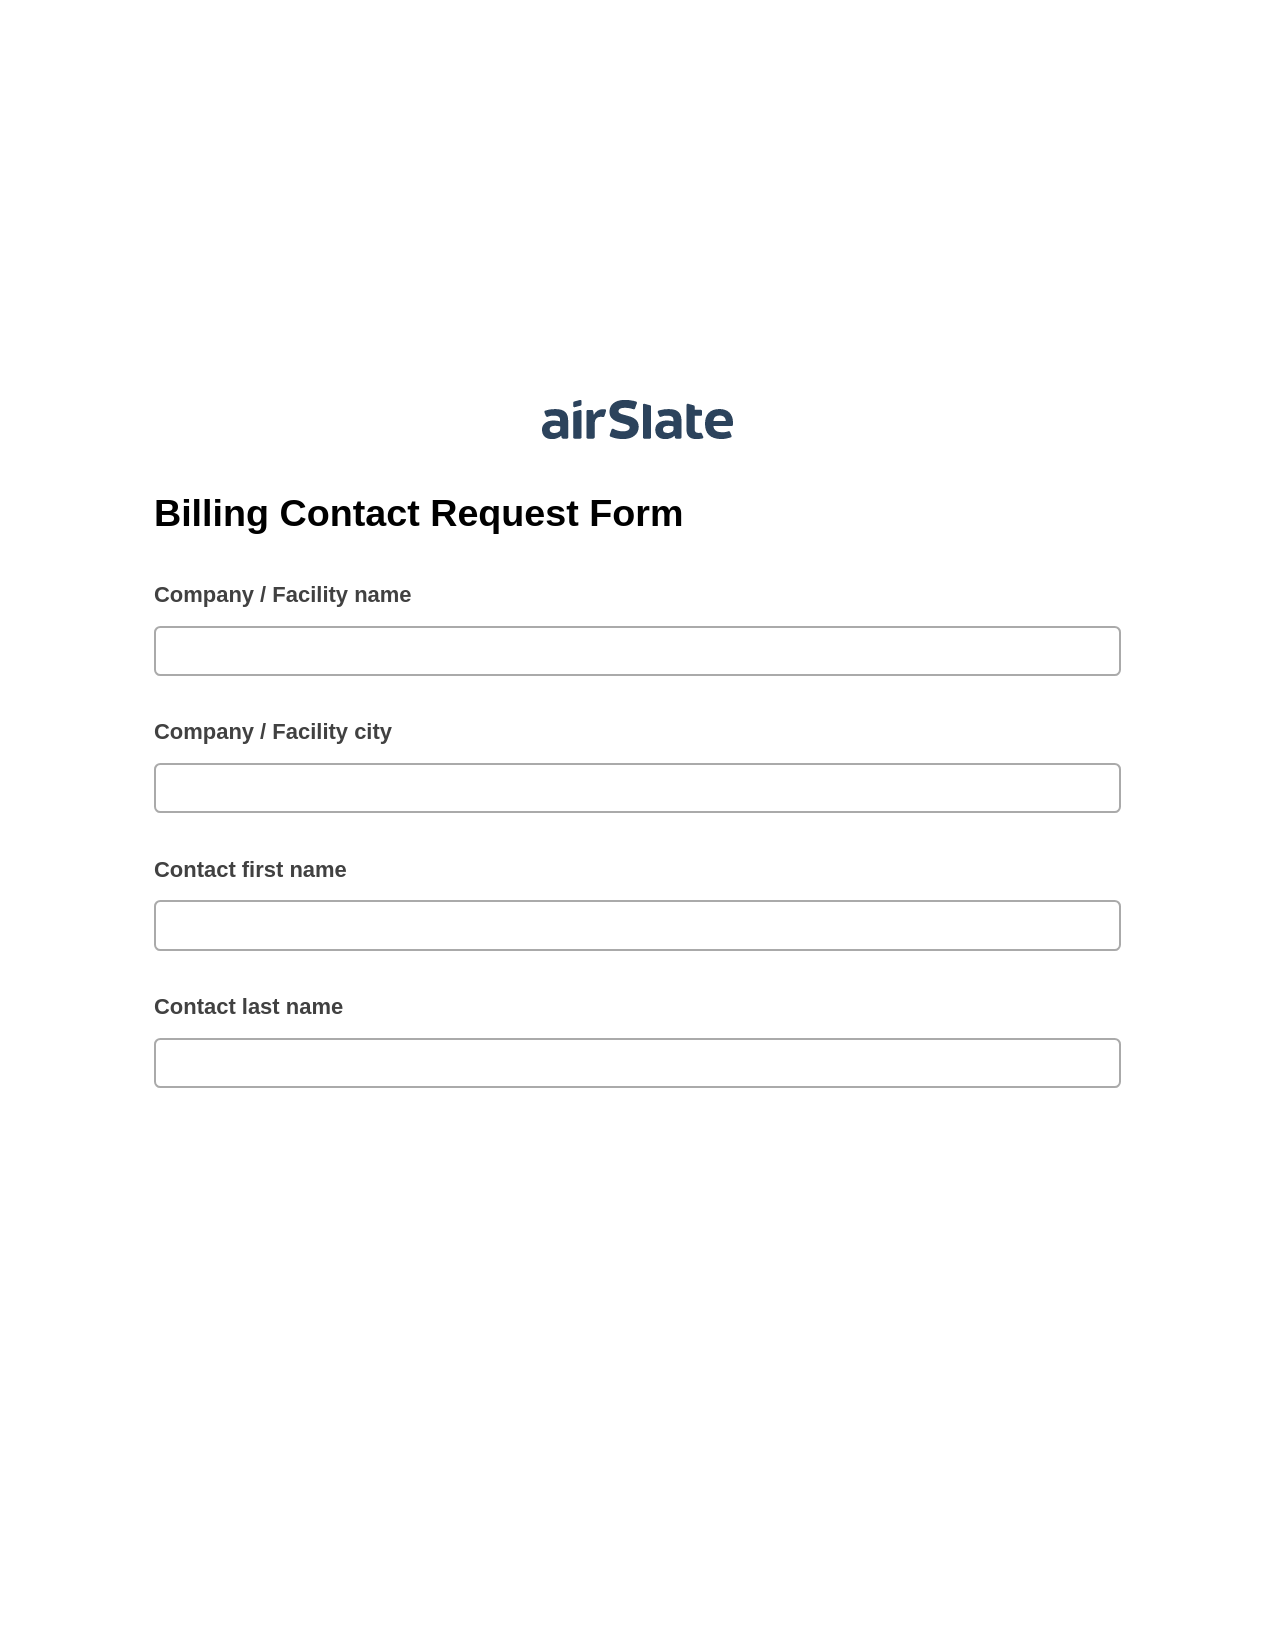 Multirole Billing Contact Request Form Pre-fill Dropdowns from CSV File Bot, Create NetSuite Records Bot, Export to Excel 365 Bot